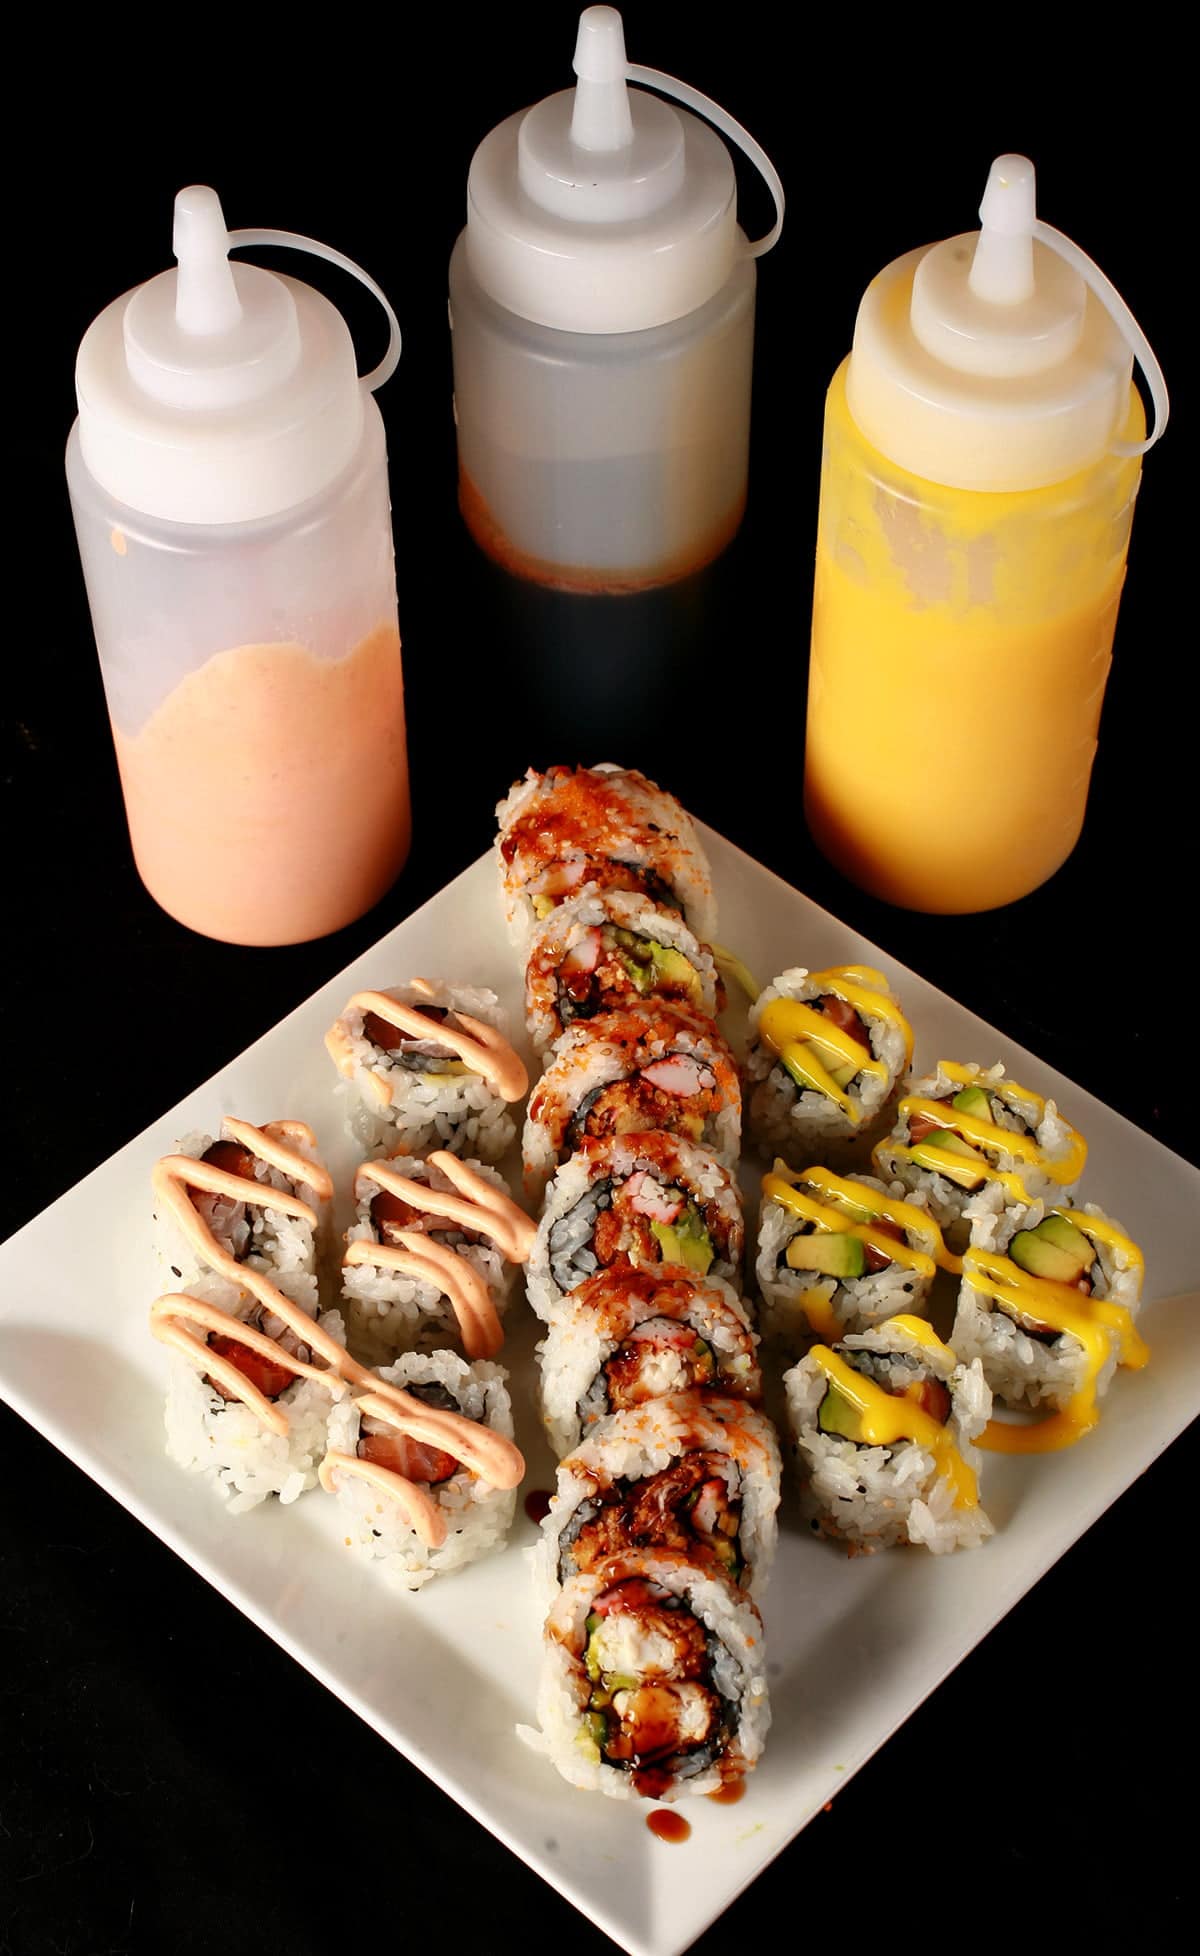 Close up image of 3 bottles of sauce - one yellow, one brown, and one pink. In front of the bottles is a plate of sushi, with the 3 colours of sauce drizzled across the sushi in squiggles